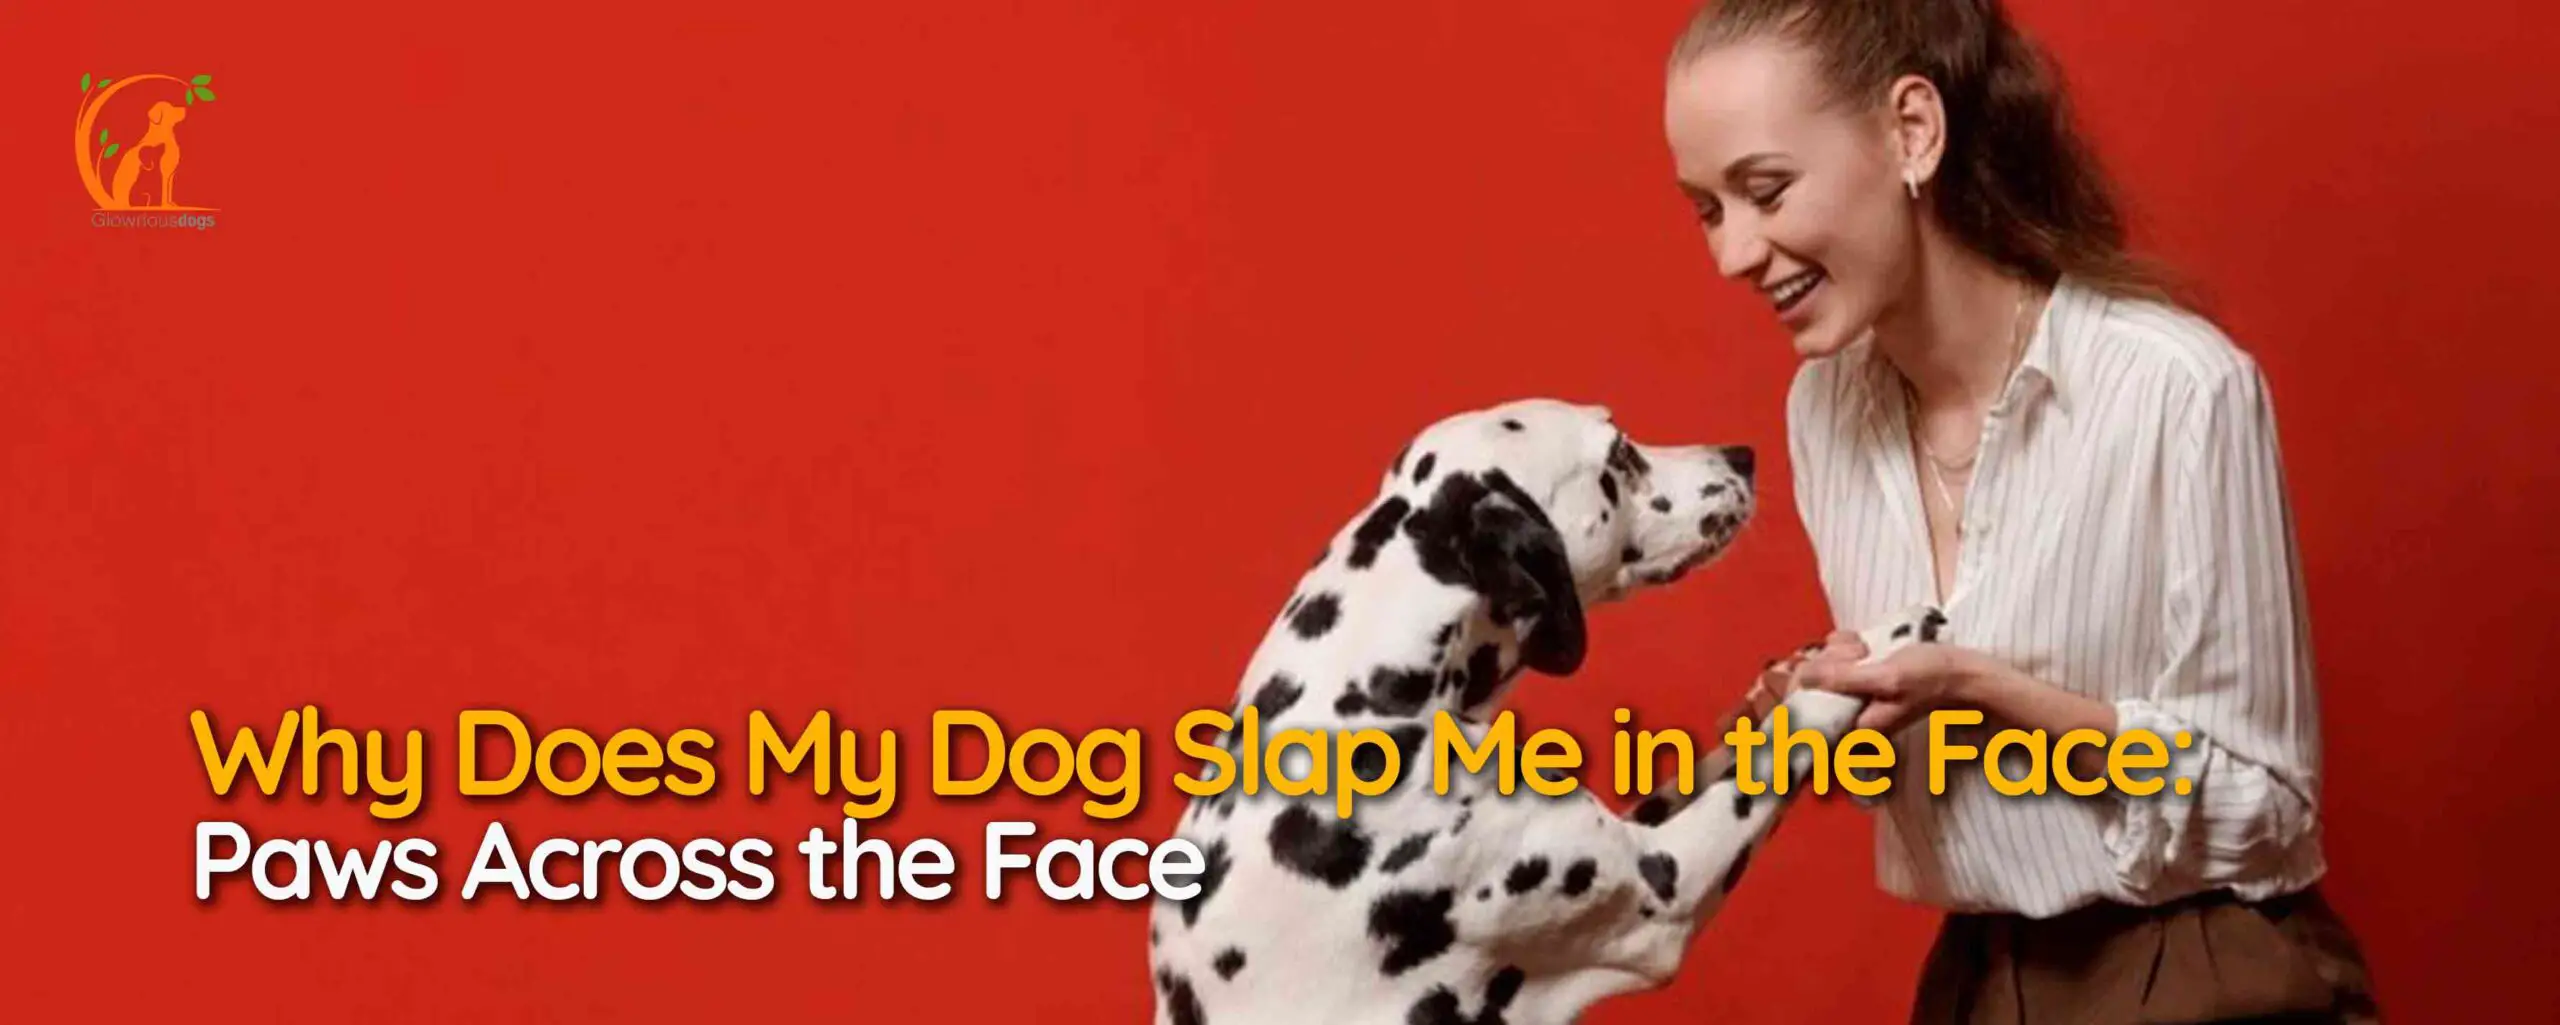 Why Does My Dog Slap Me in the Face: Paws Across the Face